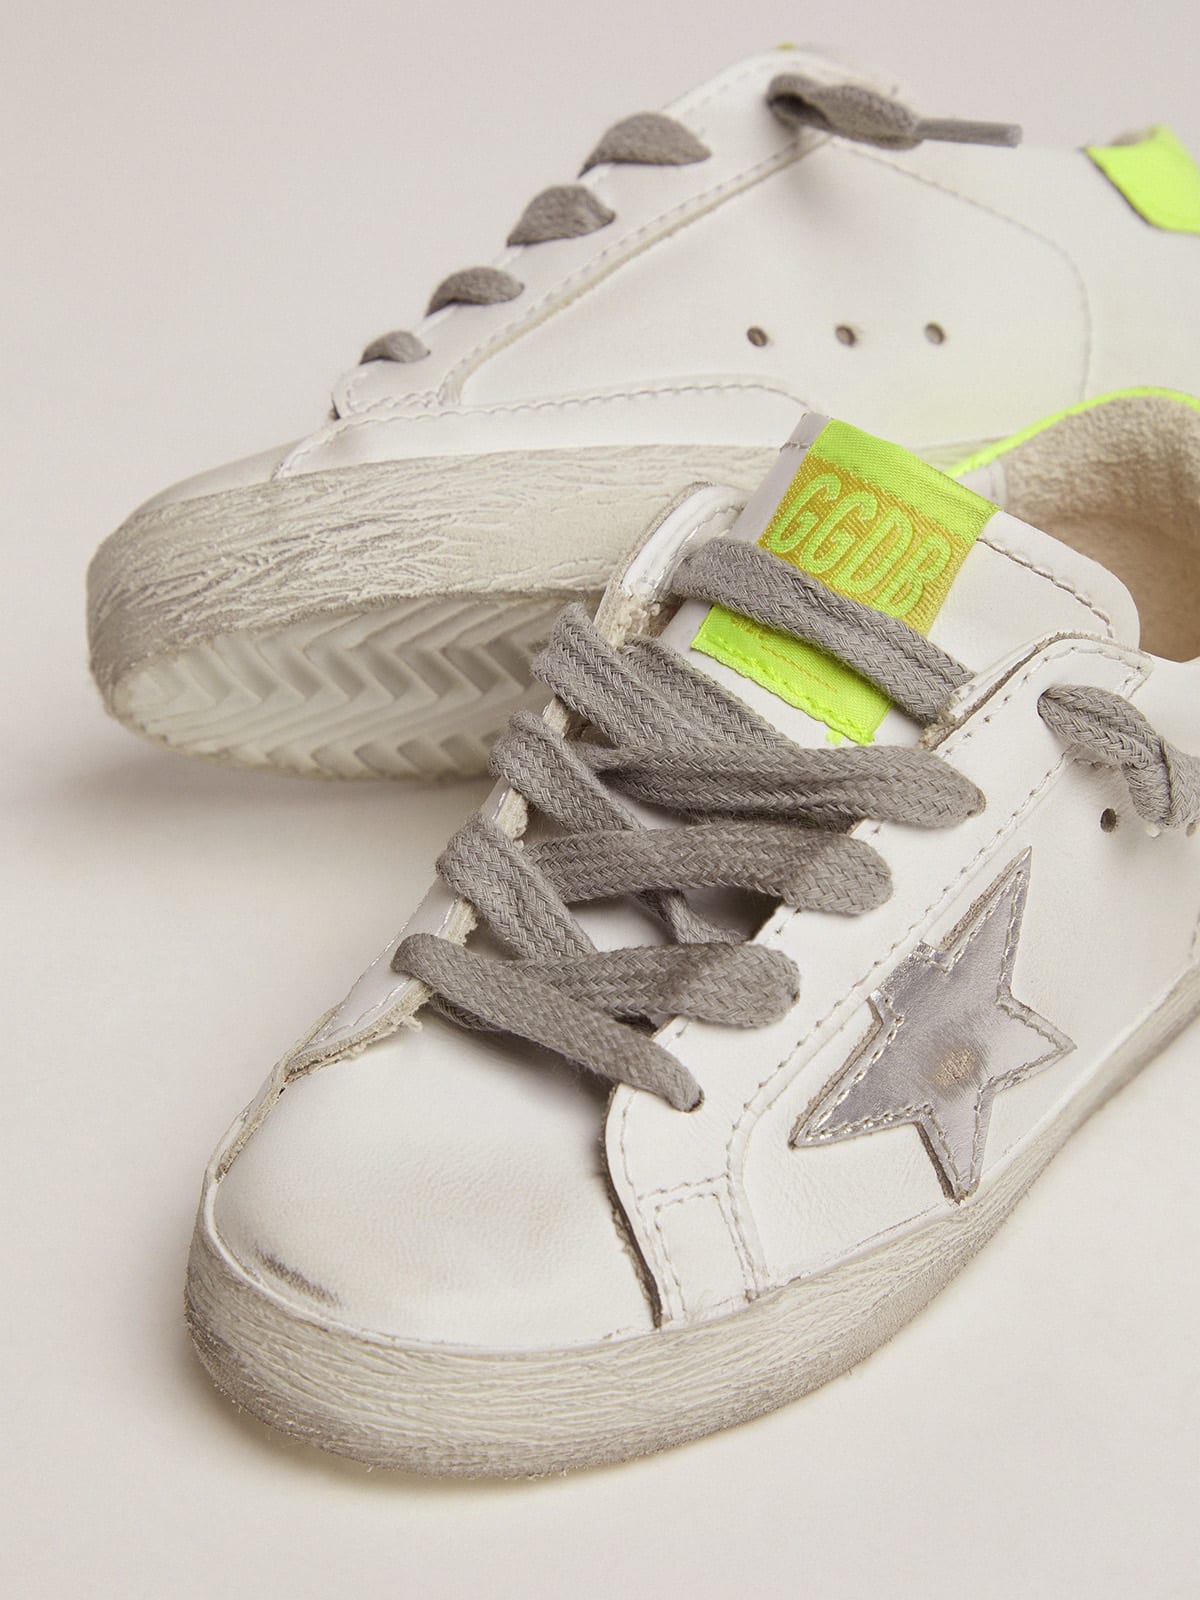 Golden Goose - Super-Star sneakers with fluorescent yellow heel tab and silver star in 